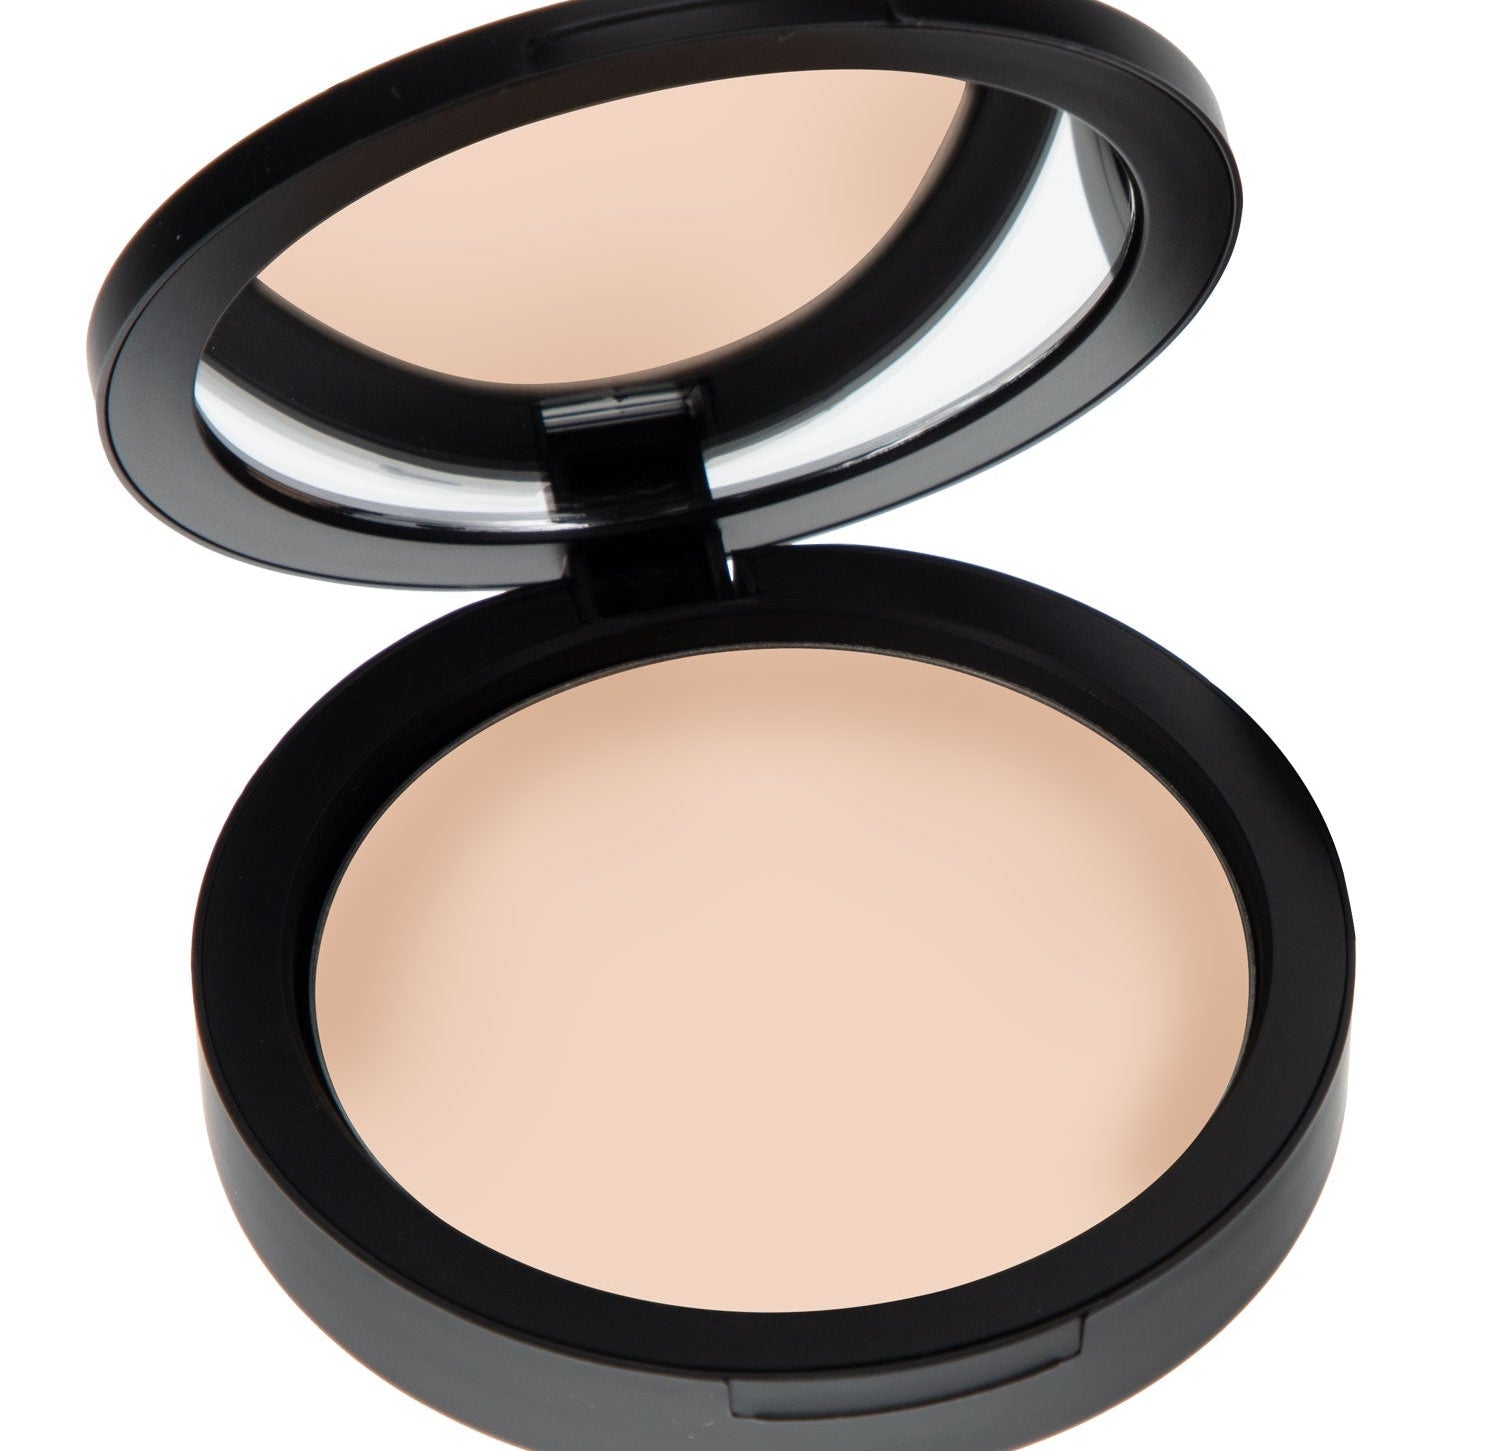 Mineral Based 4-in-1 Product is your PRESSED Powder, Foundation, SPF 15 and Soft Focus Finish All in One! No loose powder mess! Formulated without talc, gluten, phthalates, fragrance, GMO, parabens, or corn. CUDDLE (Light/Medium) - For light to medium complexions. 